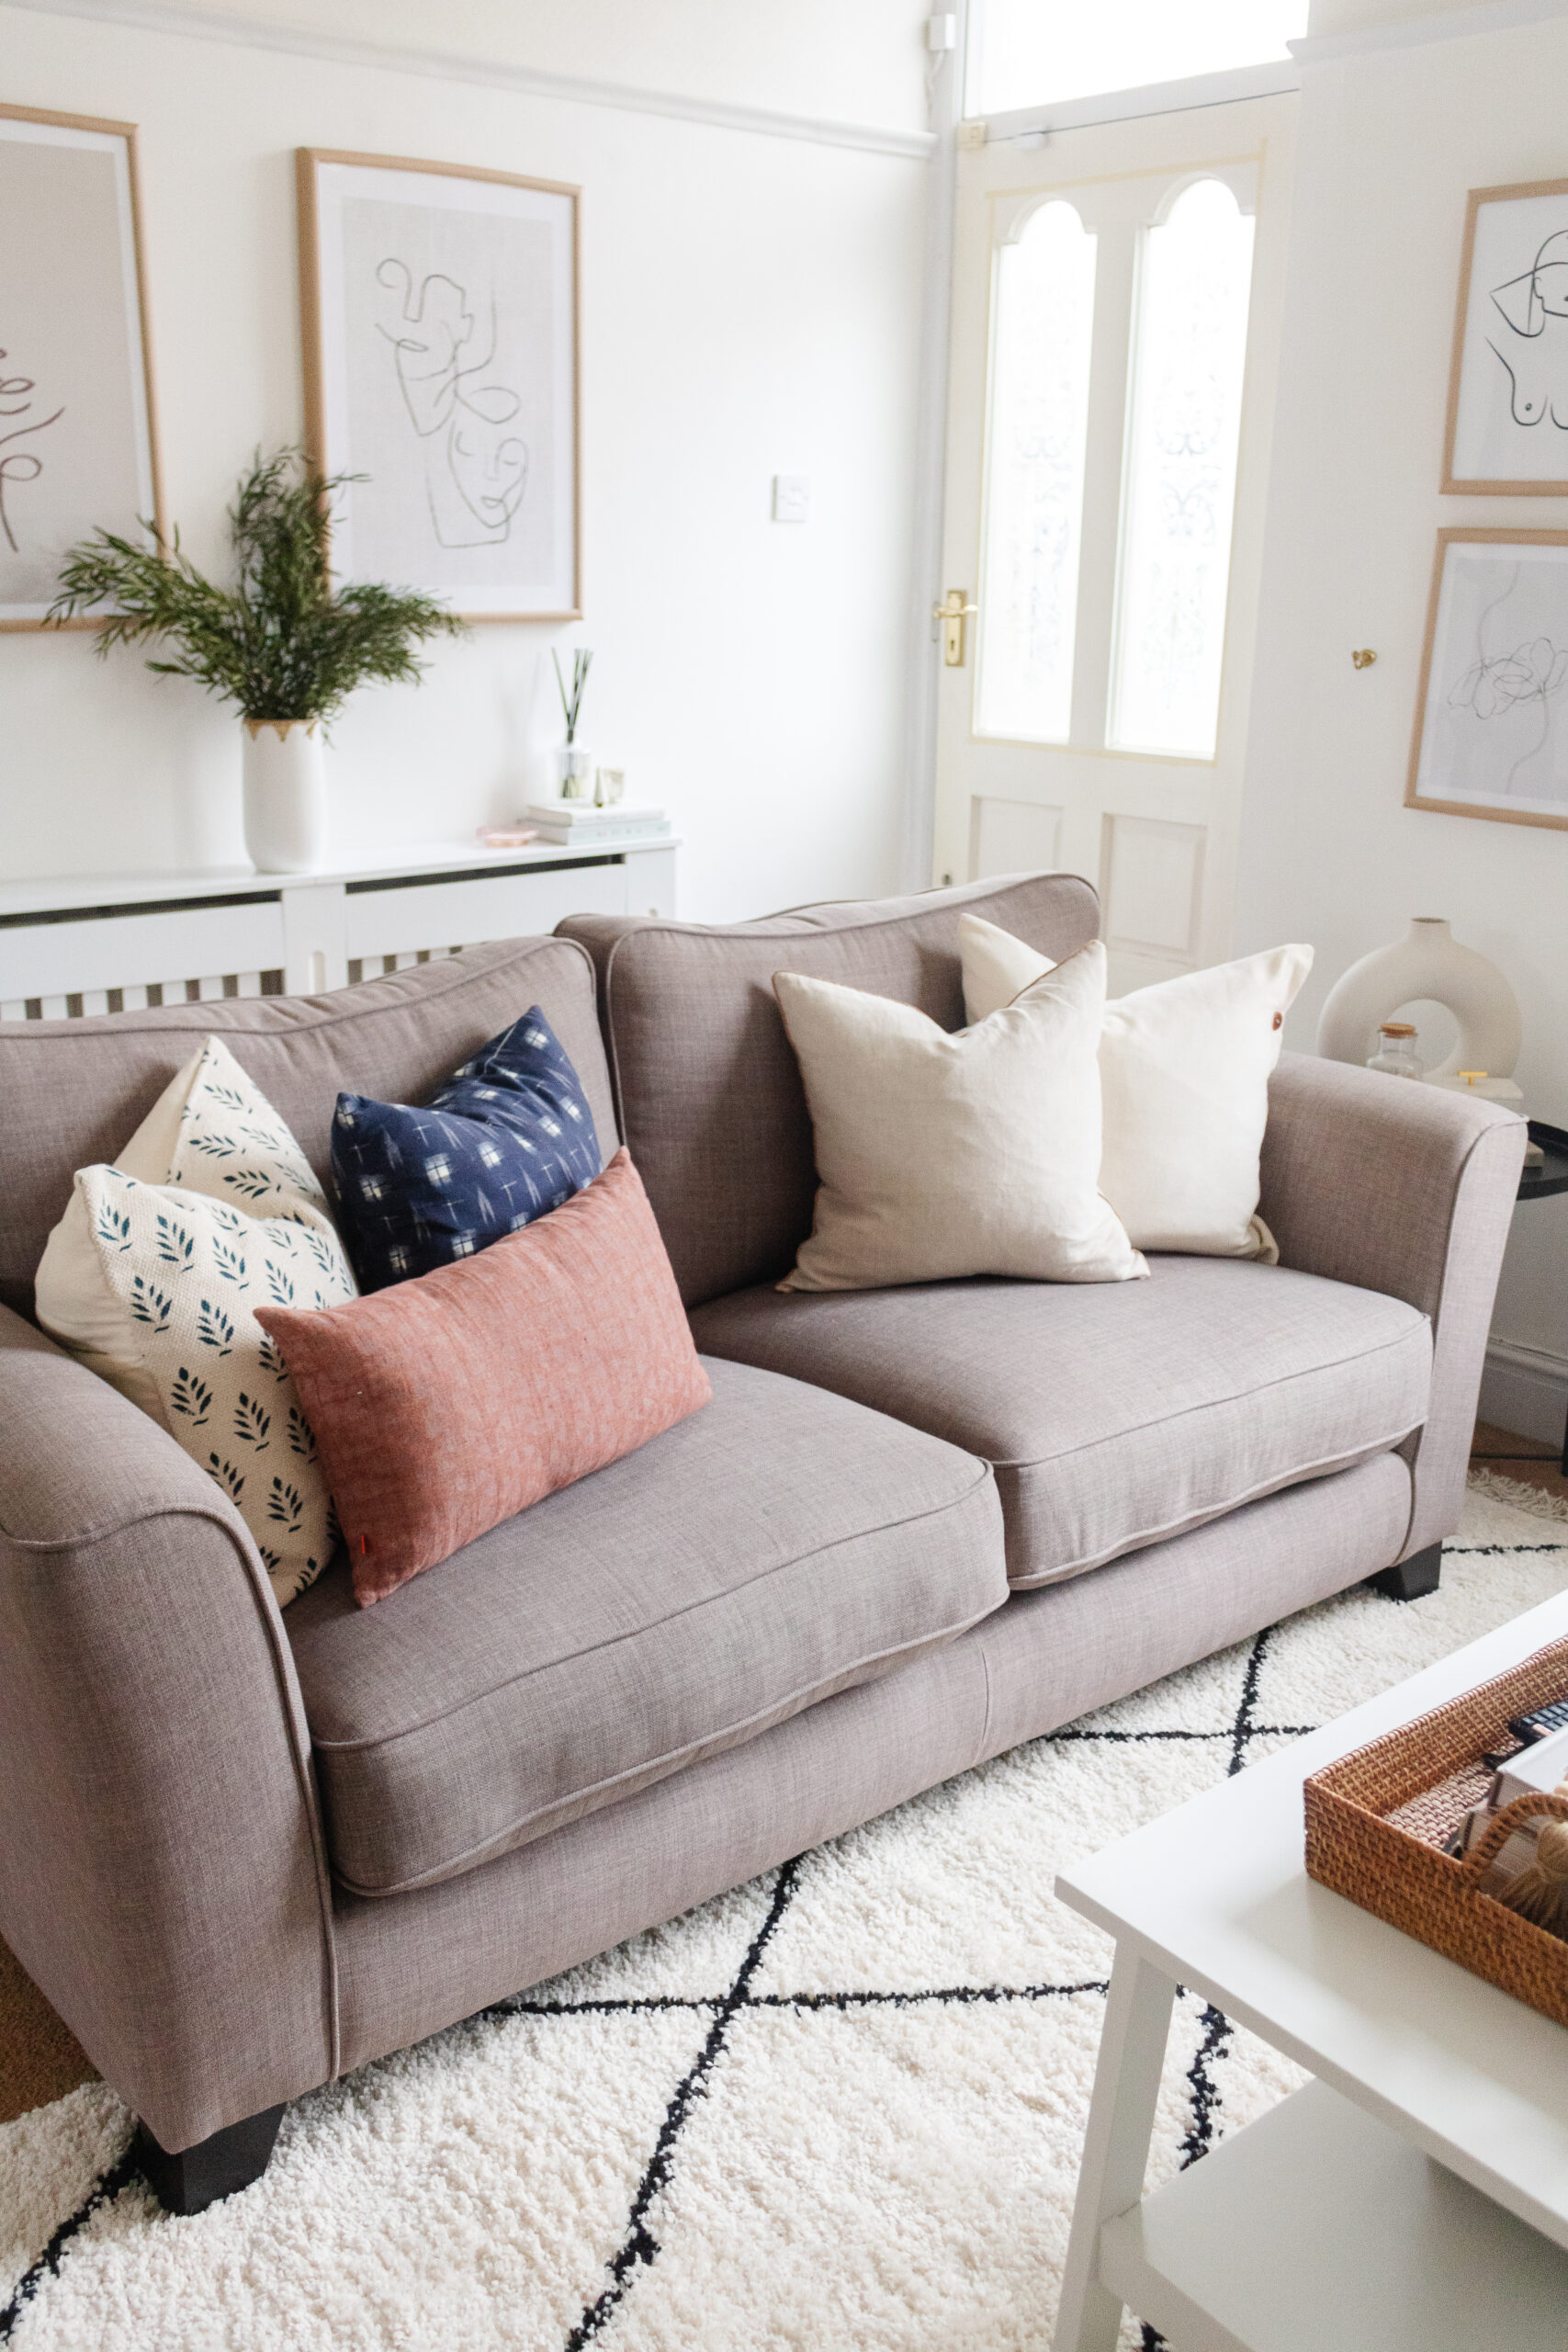 How to Mix & Match Pillow Patterns - An Edited Lifestyle